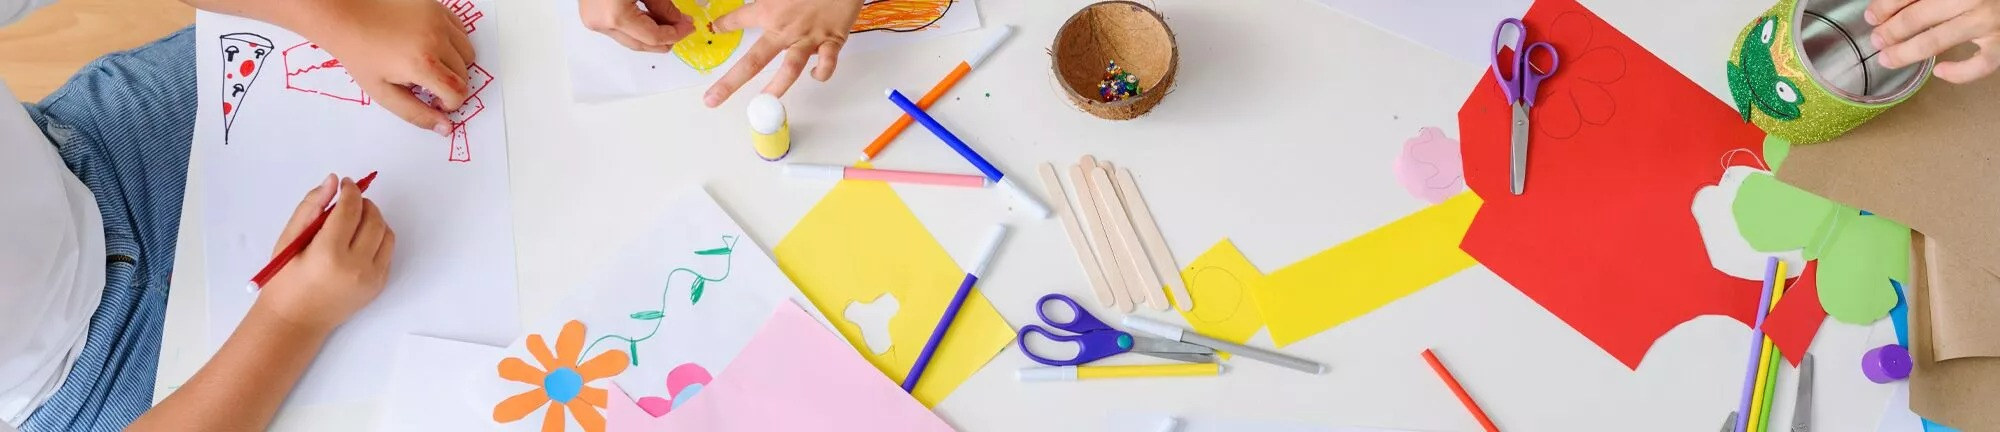 Art Classes That Your Kids Might Be Interested In